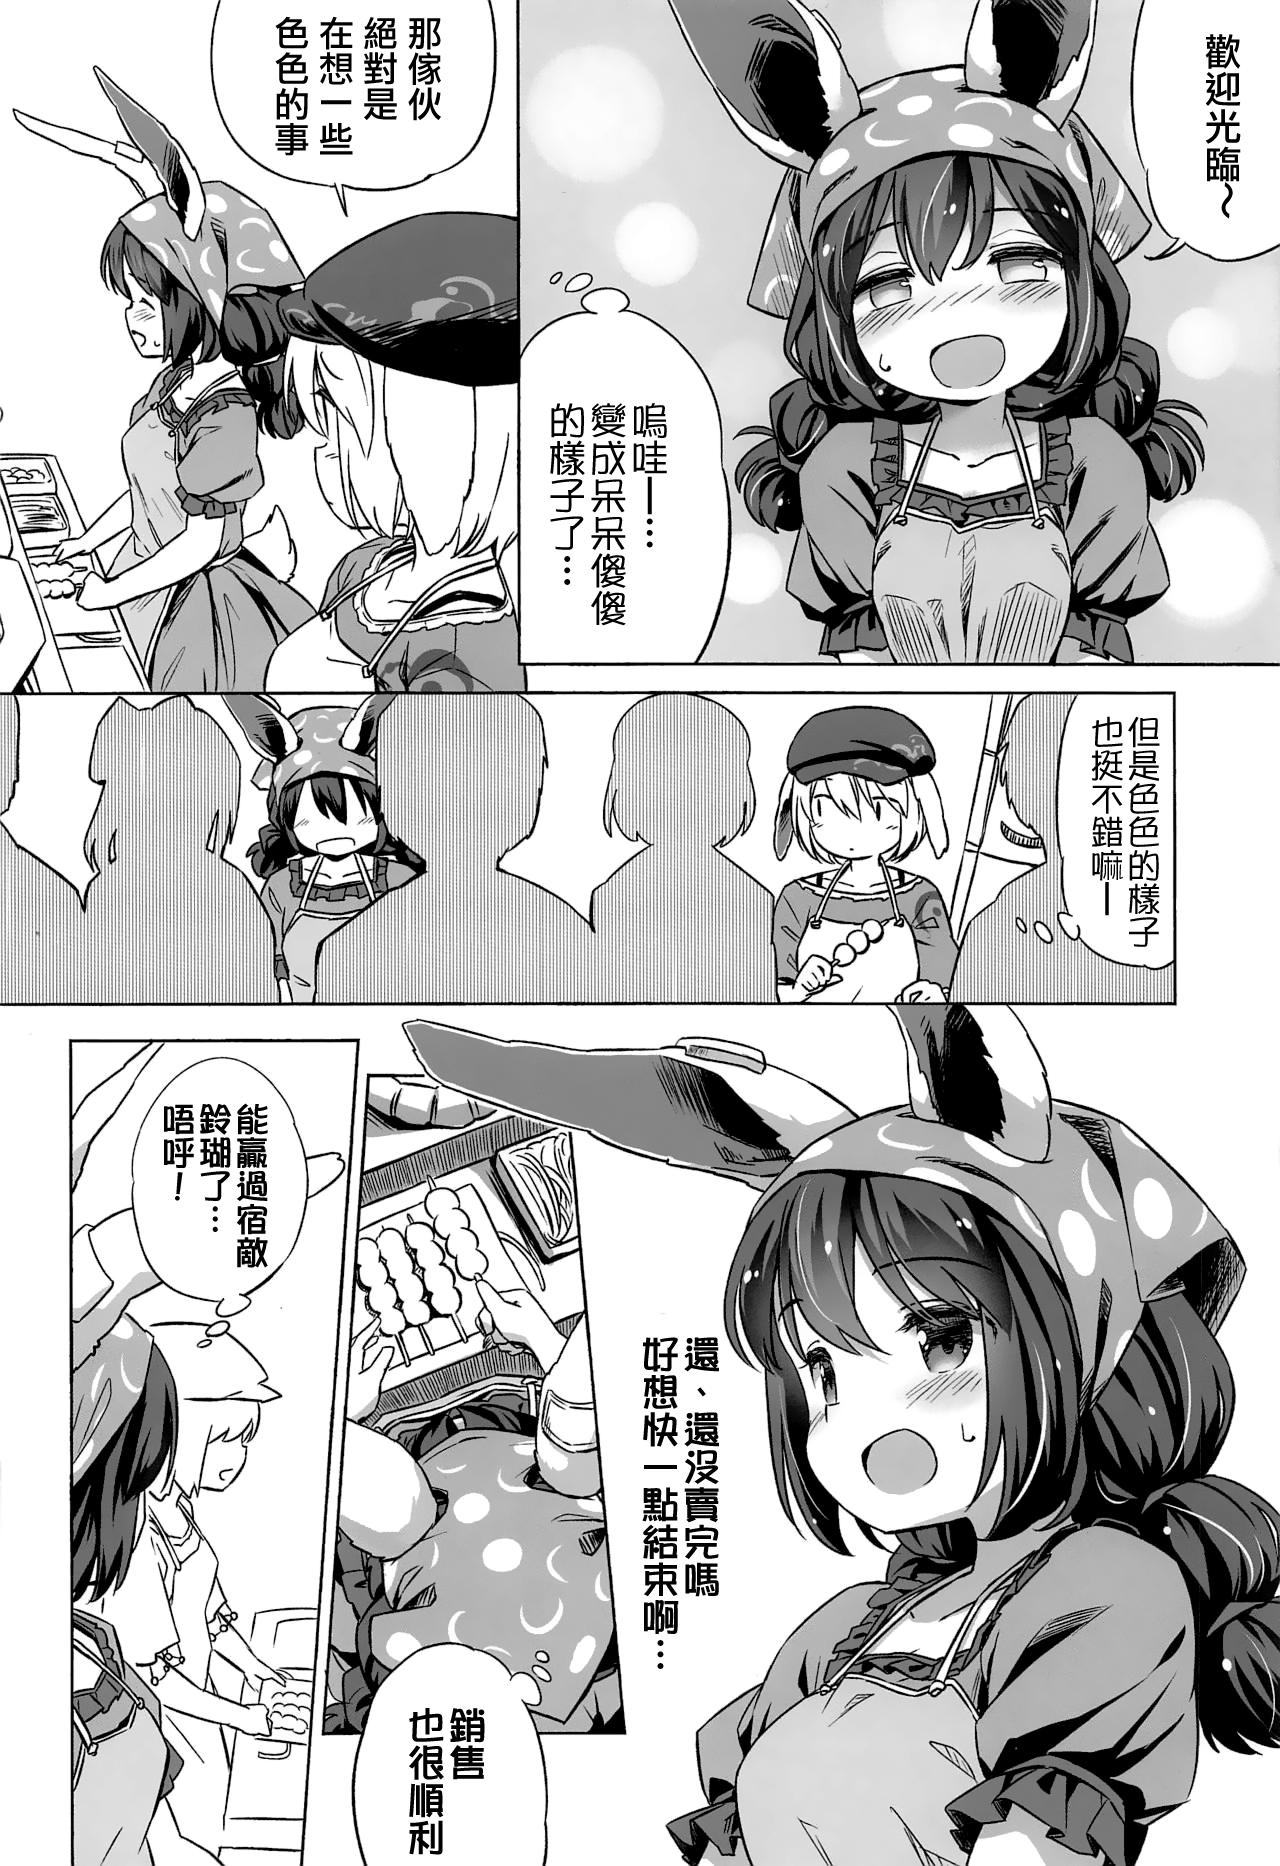 Gostoso Granny Smith Mating - Touhou project Stepbro - Page 9